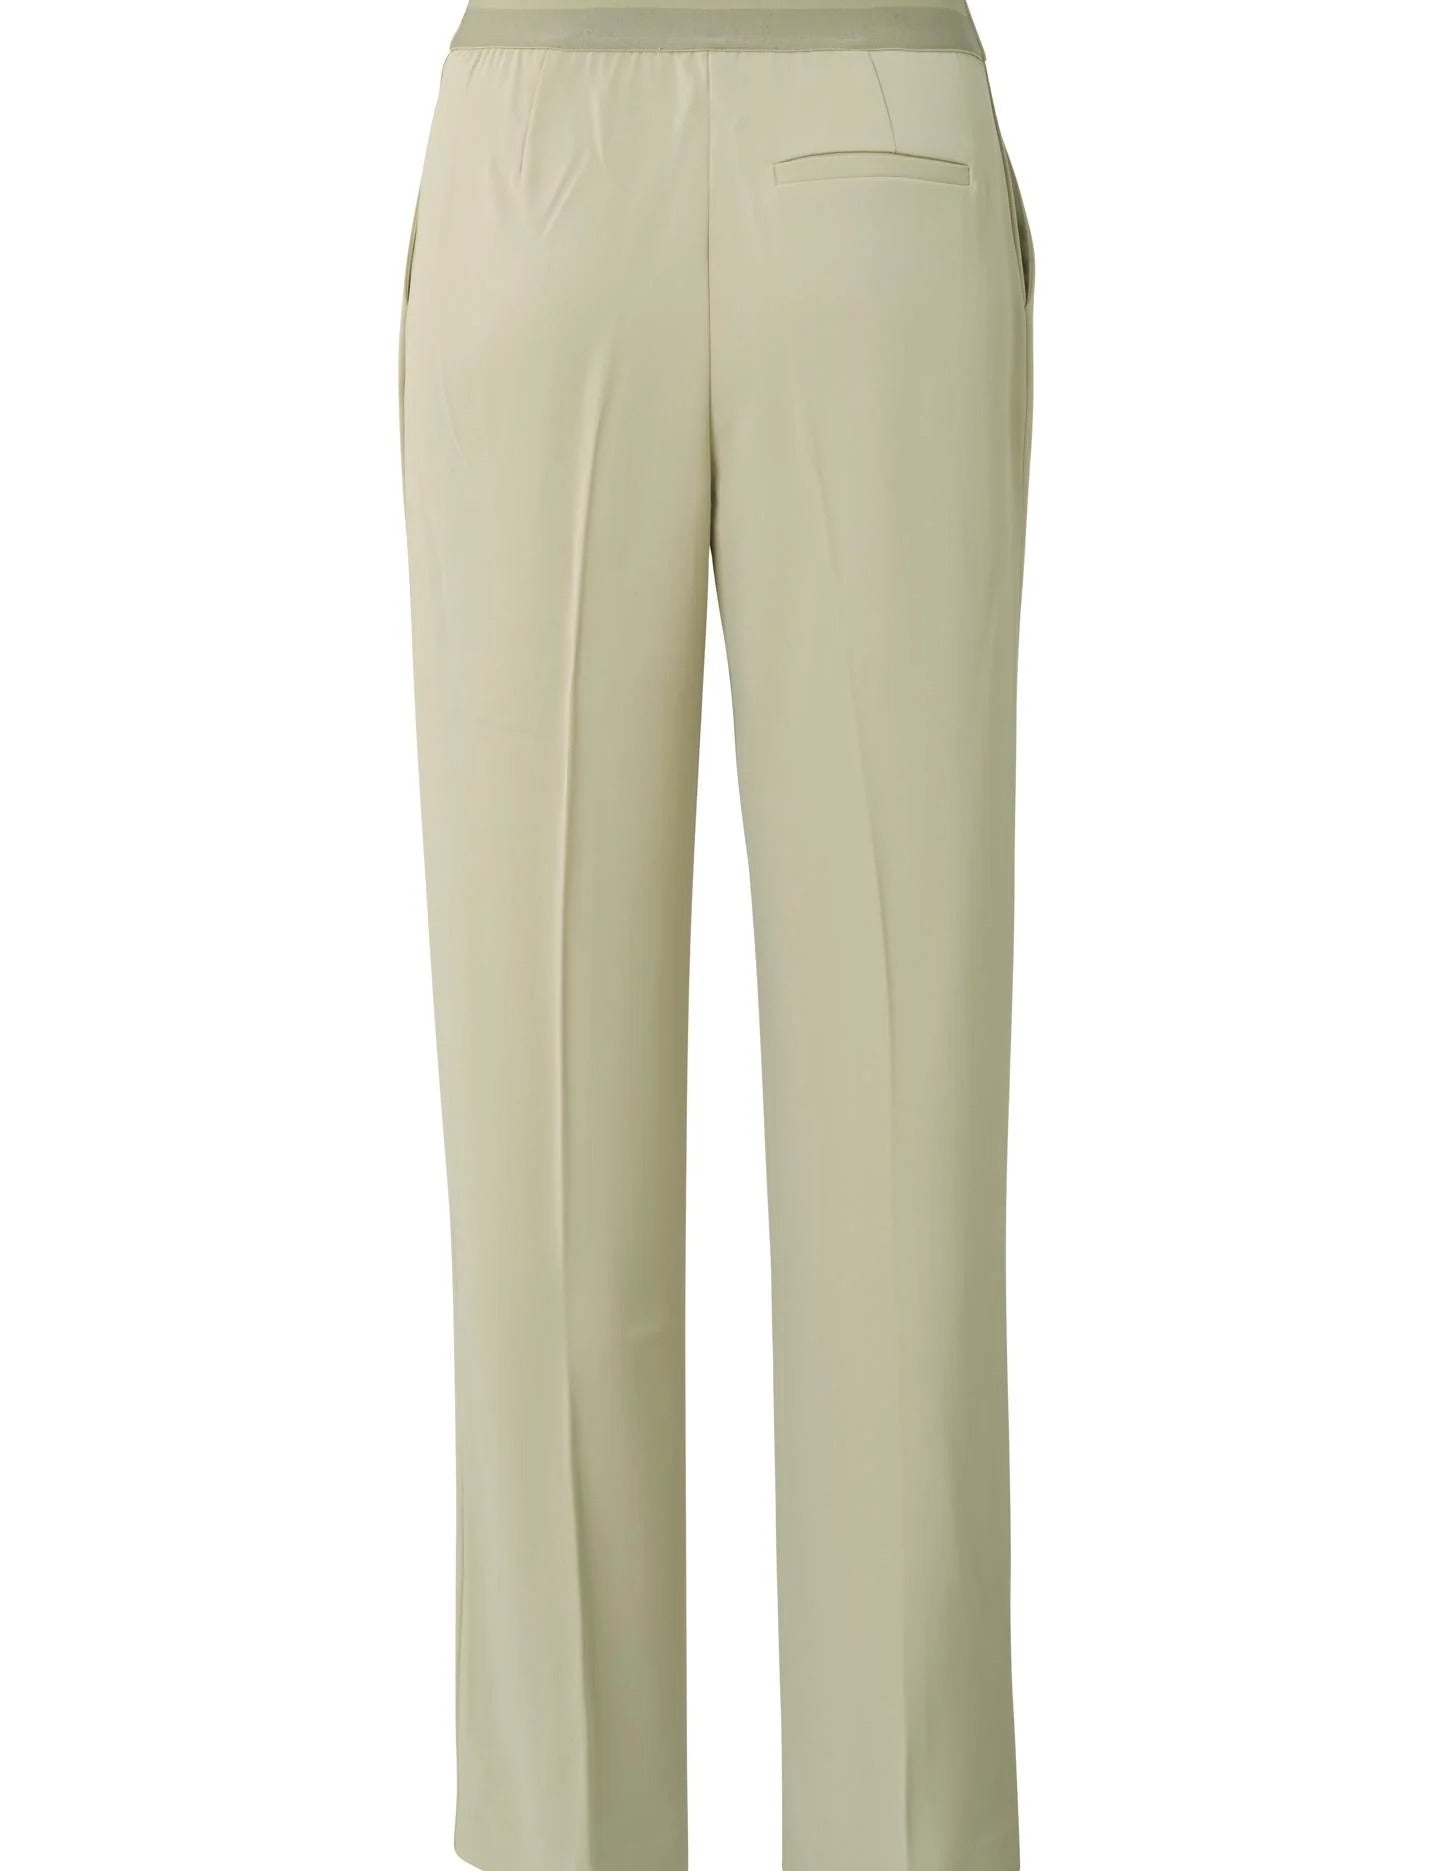 woven-wide-leg-trousers-with-pockets-and-pleated-details-eucalyptus-green_2880x_jpg.jpg